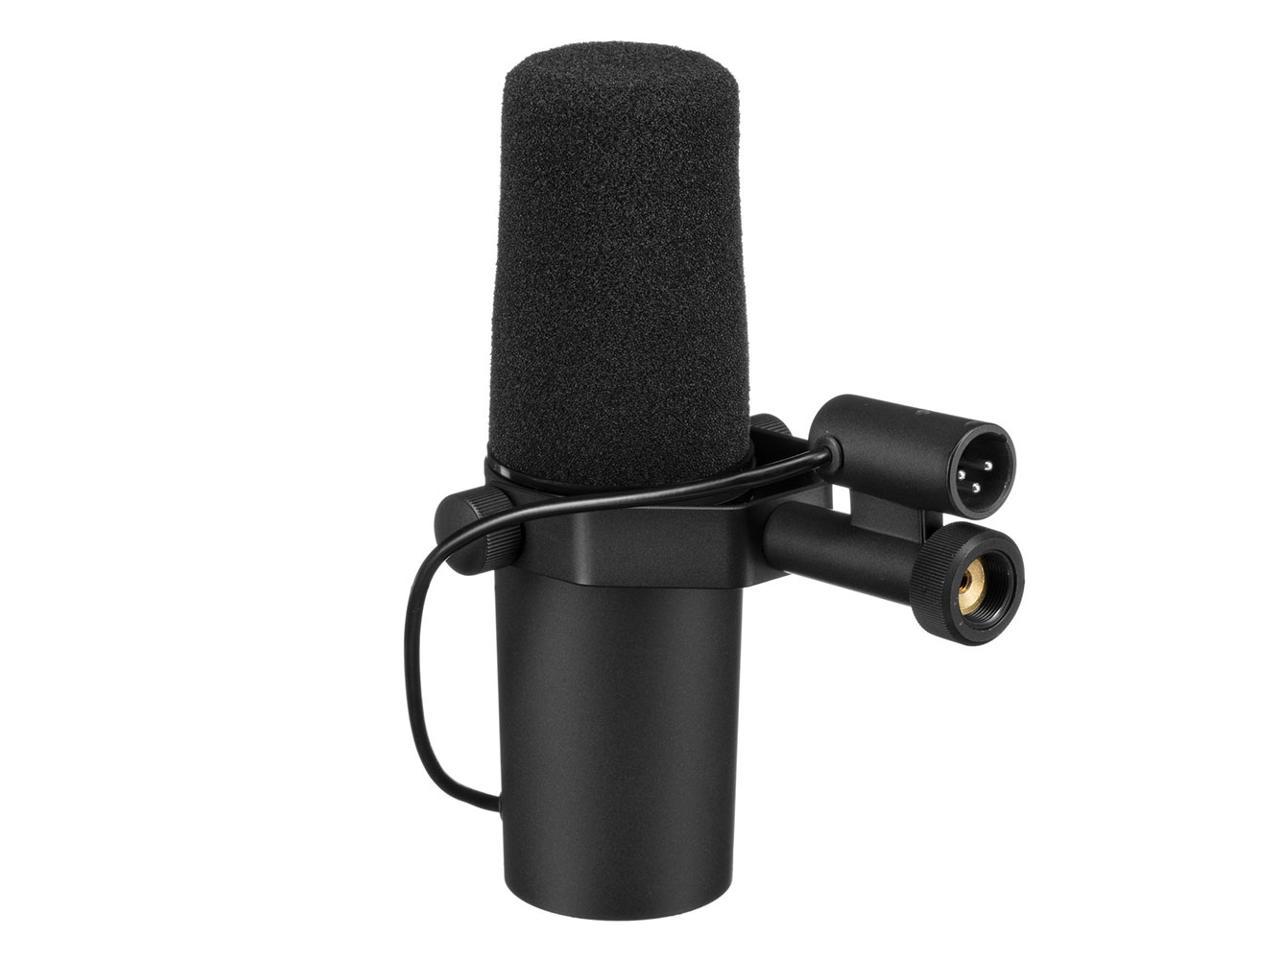 Shure Sm7b Cardioid Dynamic Vocal Mic With Cloud Microphones Cloudlifter Cl 1 Mic Activator 2x Xlr Cable Straps Bundle Newegg Com